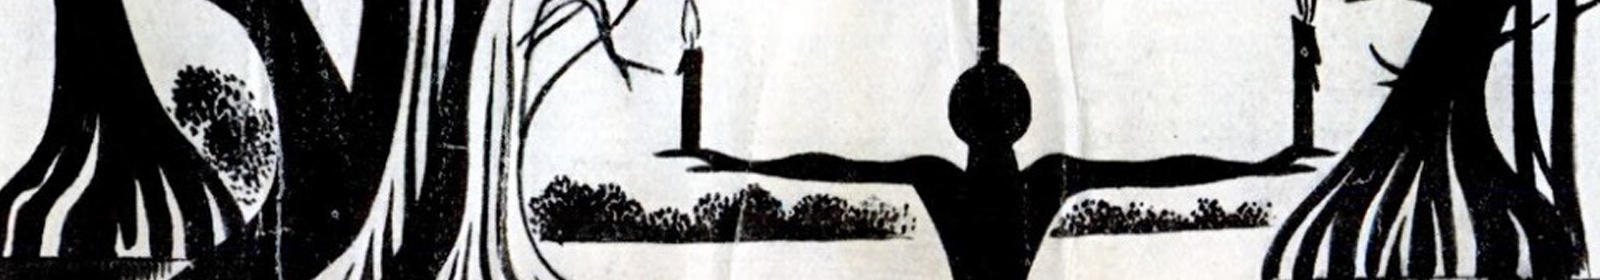 Stark drawing with heavy black lines hinting a human figure holding candles in a dark forest